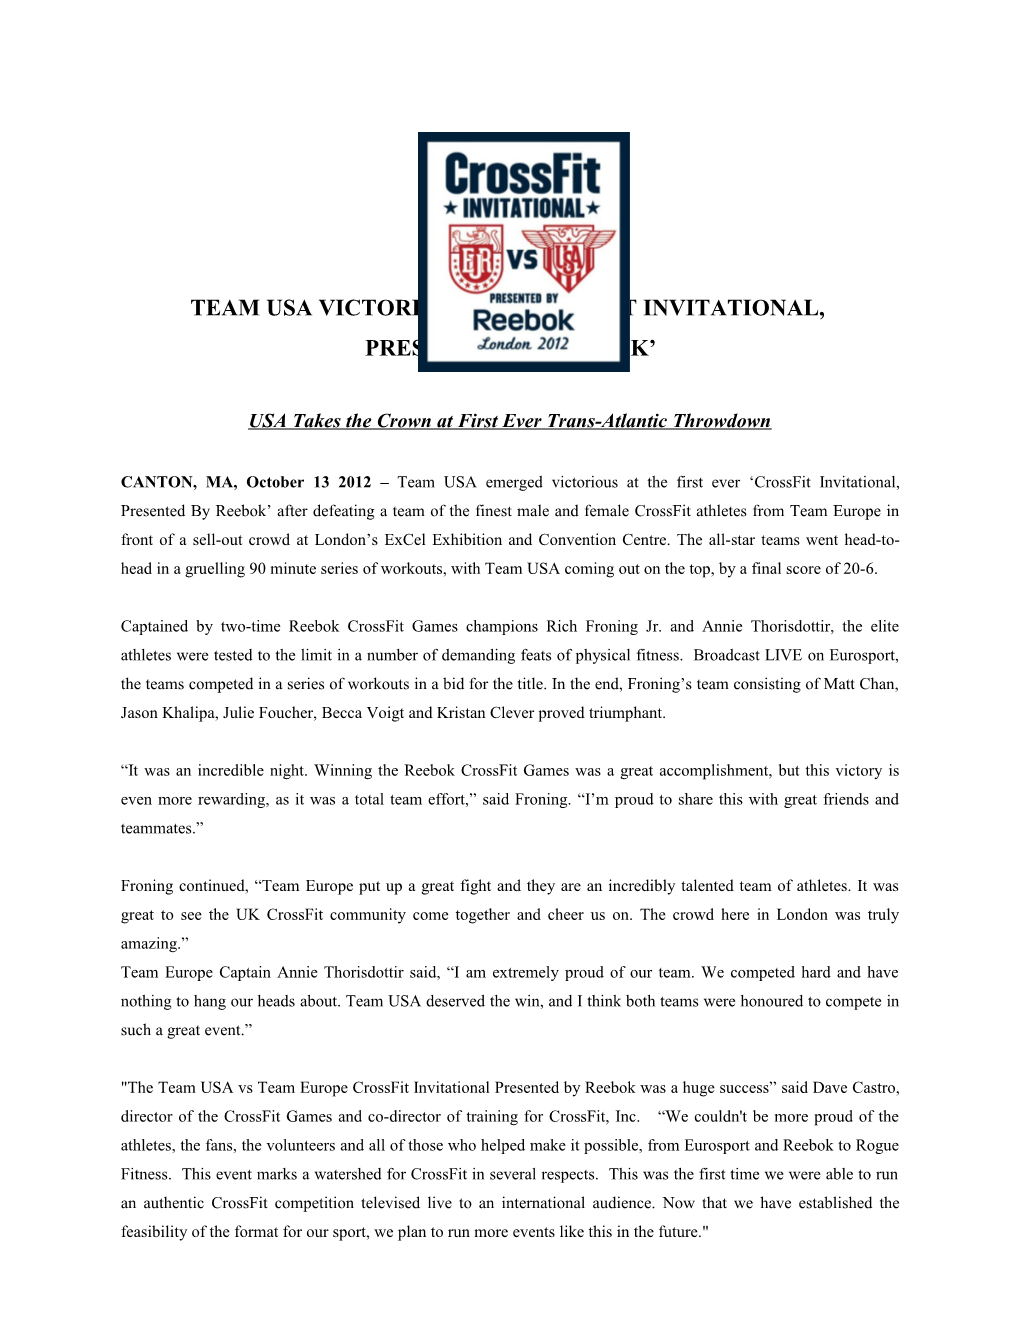 Team Usa Victorious at Crossfit Invitational